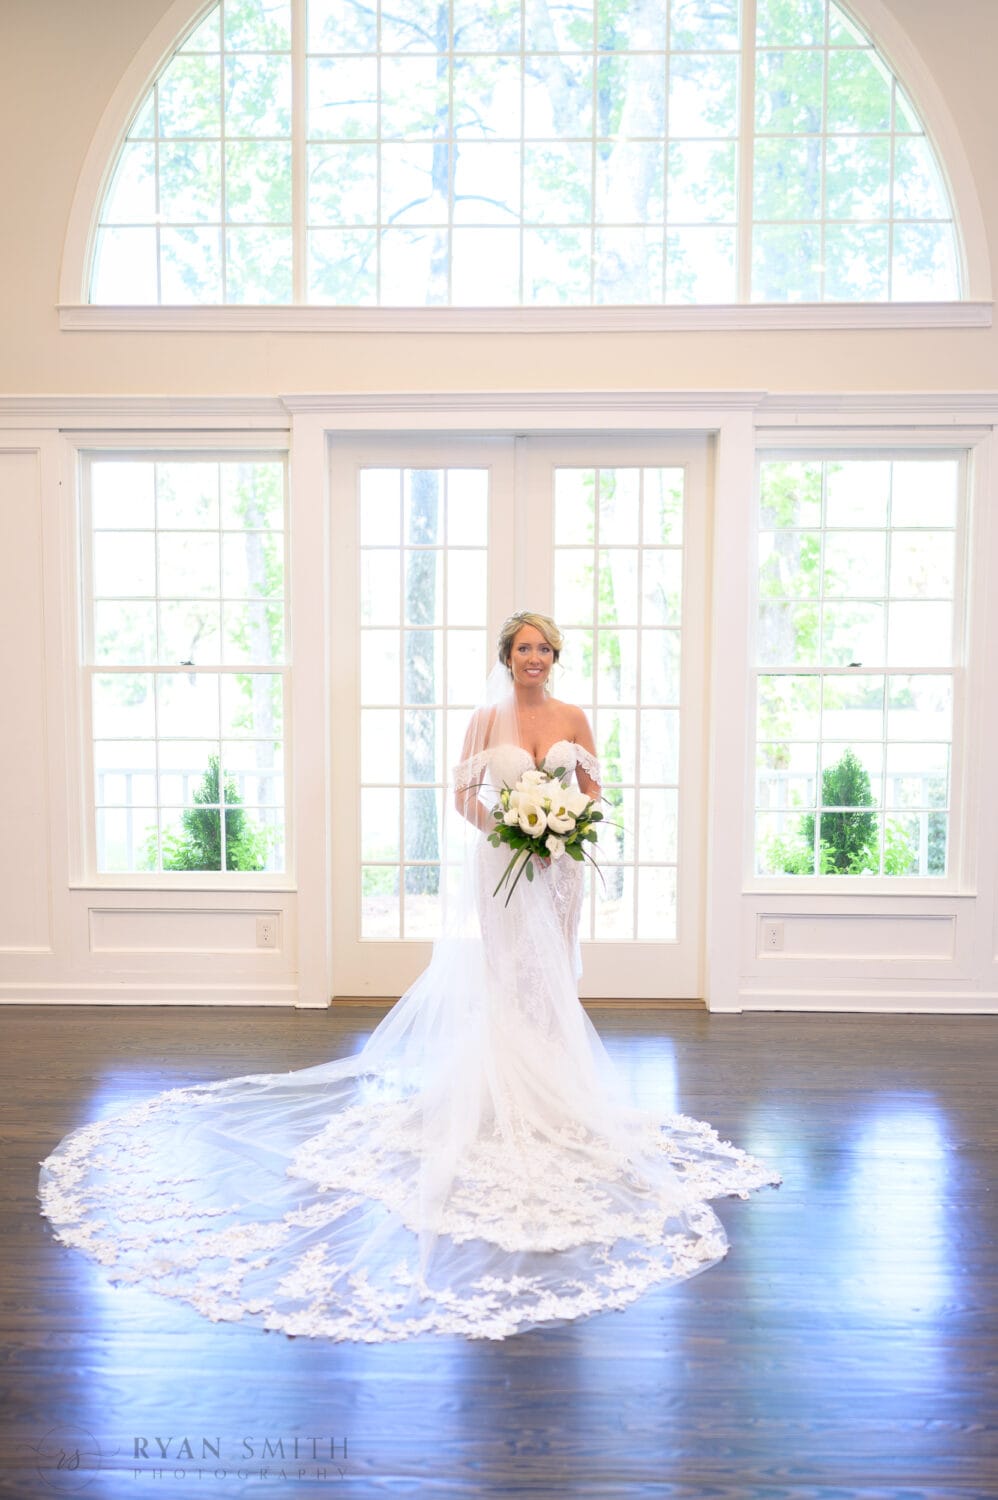 Bride standing in the window light  - The Village House at Litchfield